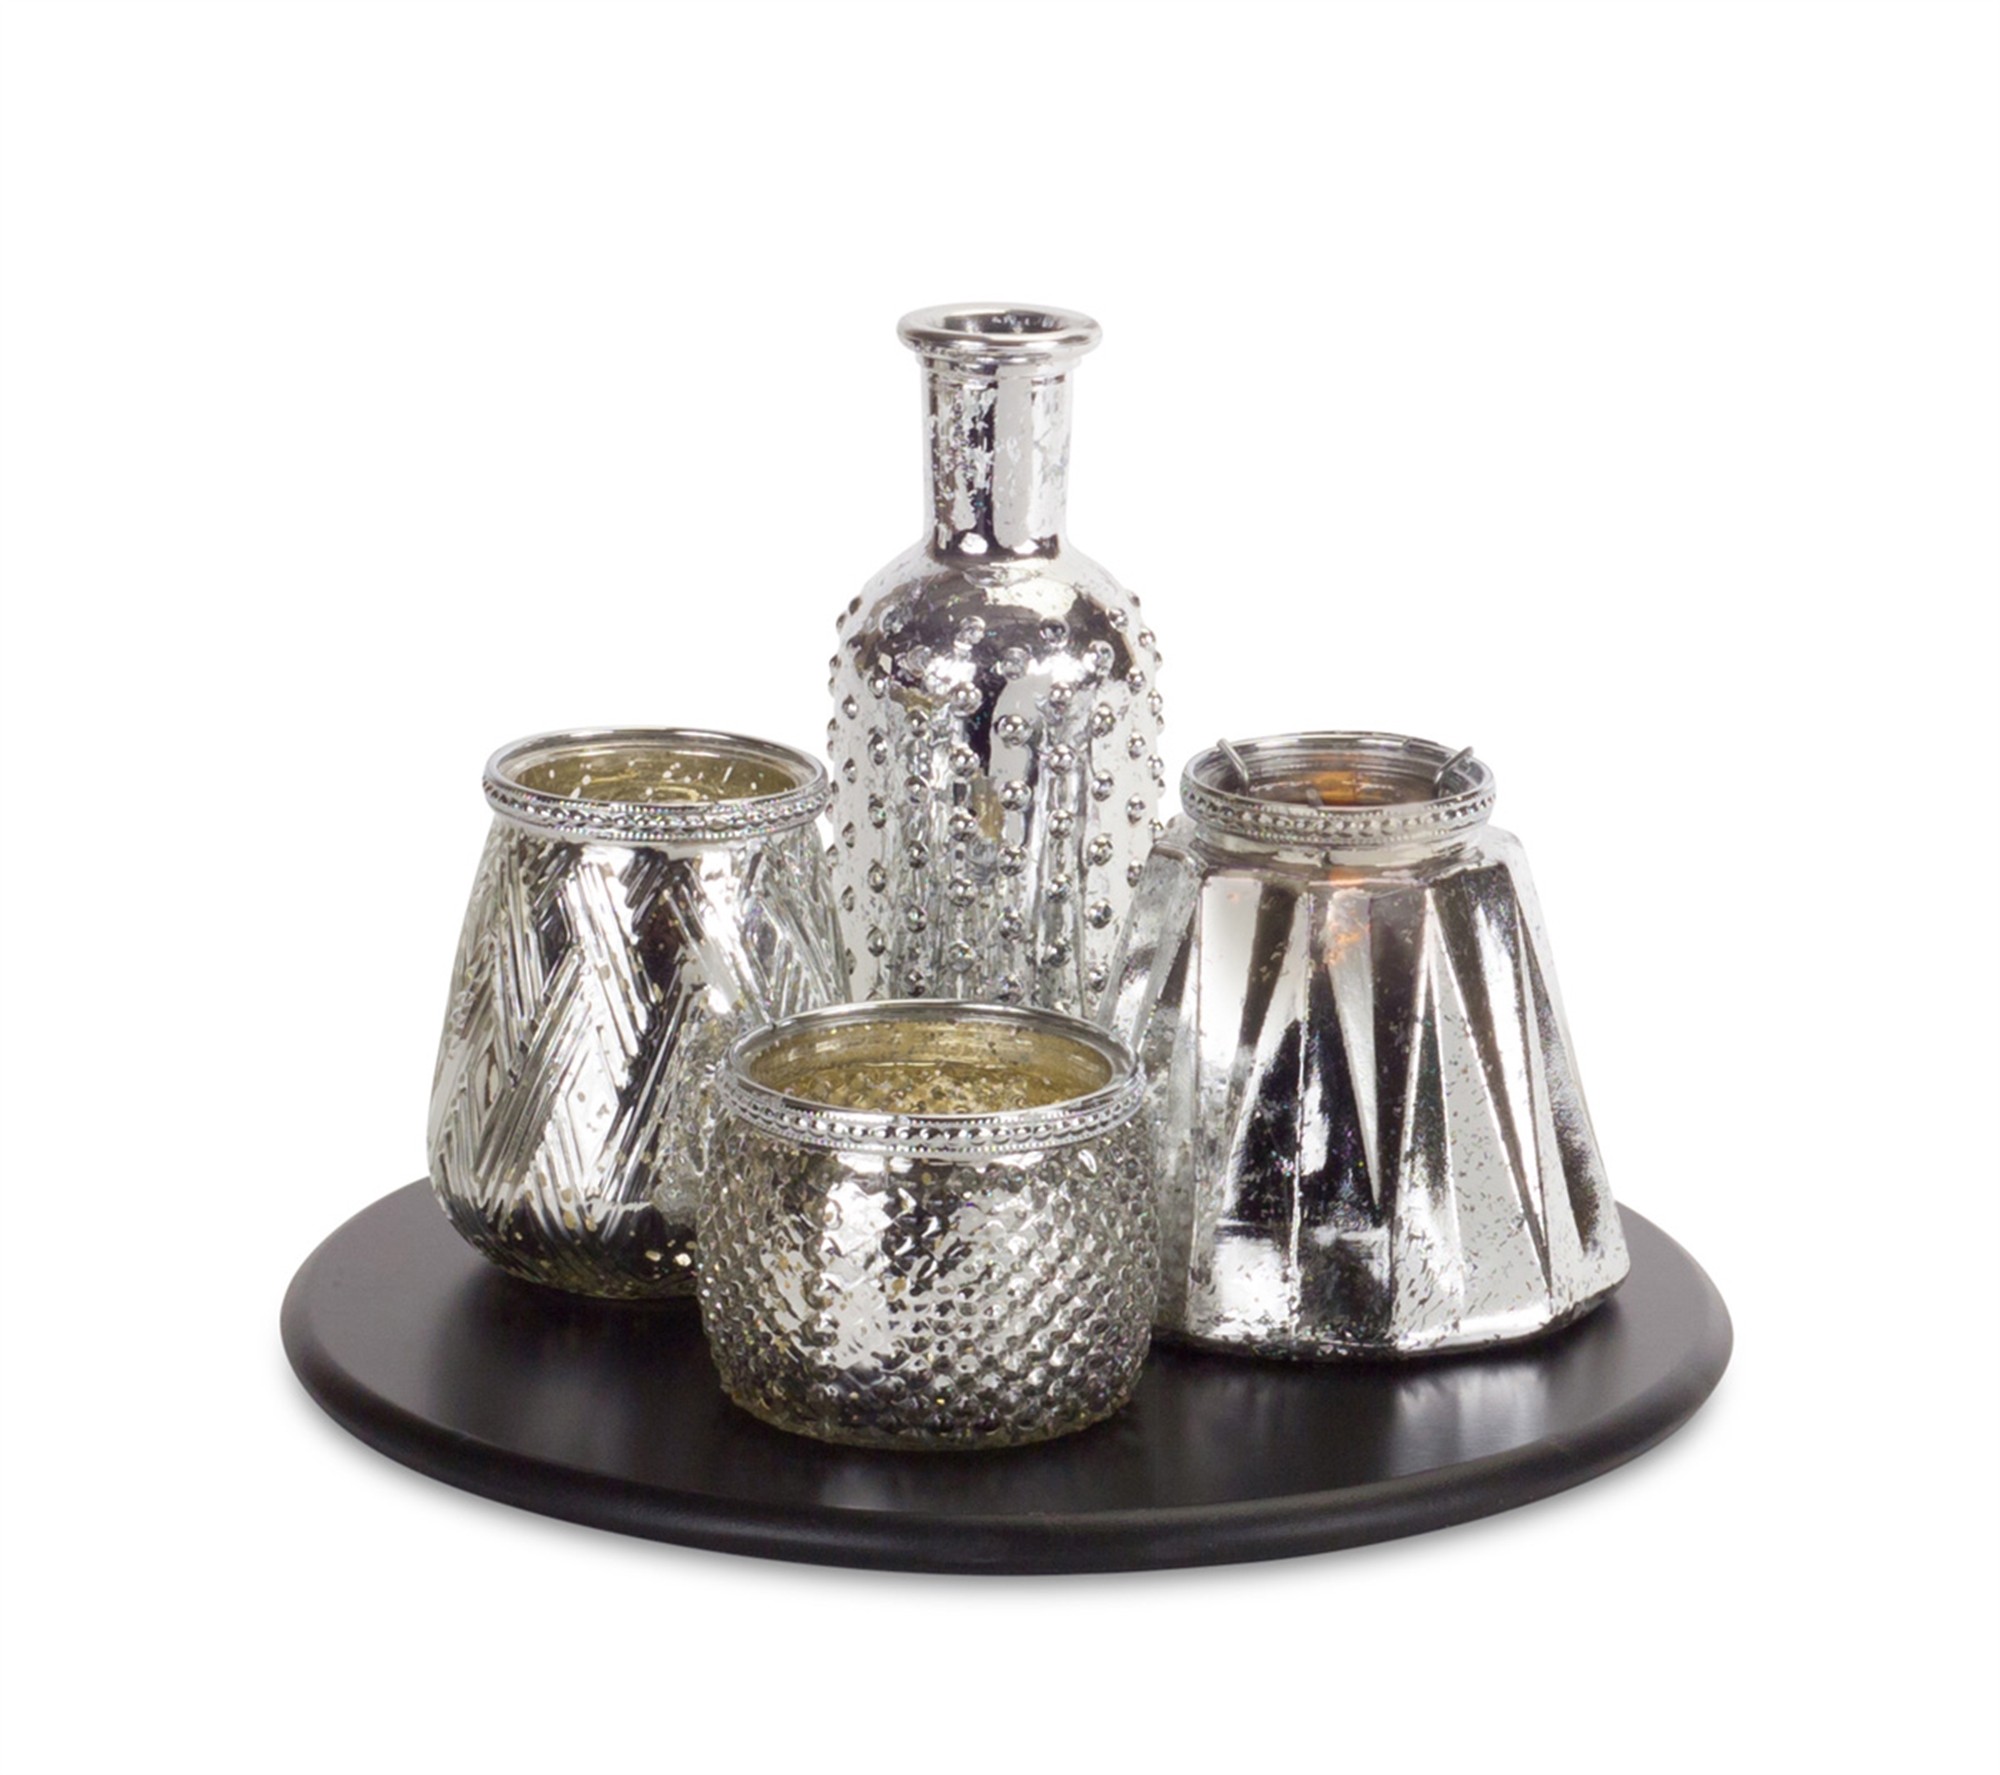 Candle Garden 2.5"-7.25"H Glass, includes Tray 12"D Wood